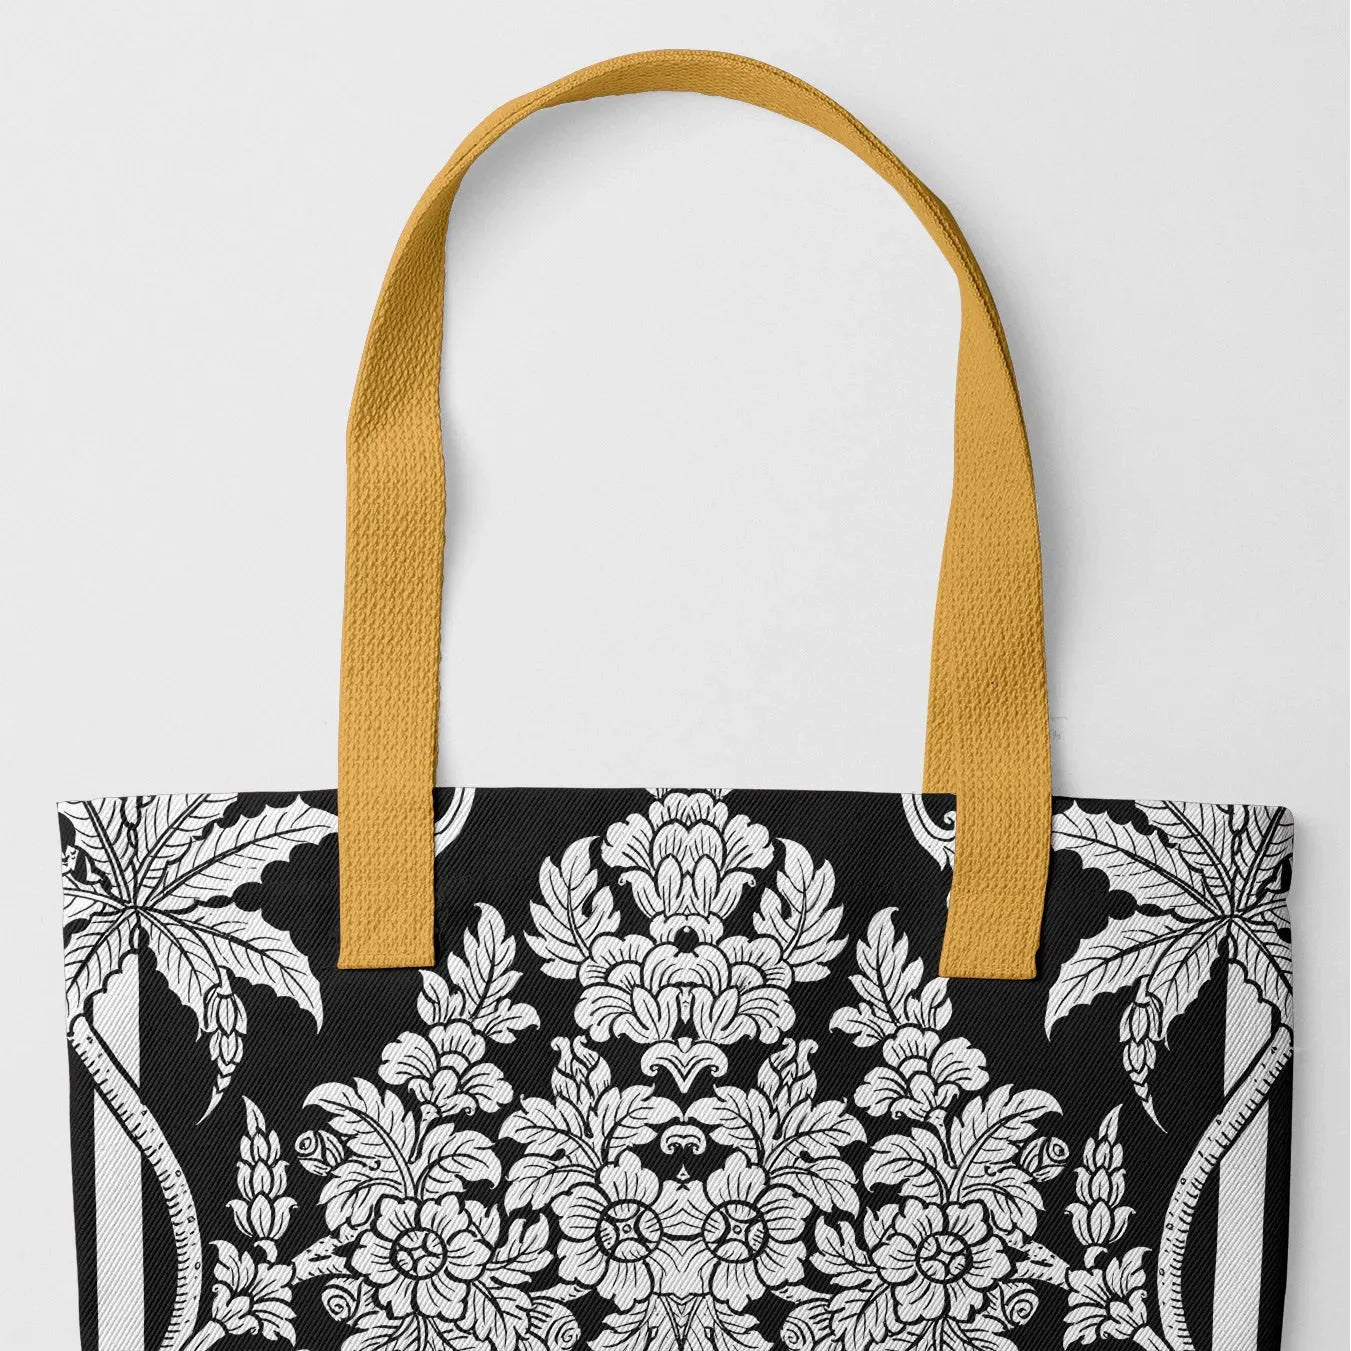 Midnight Oasis Tote Bag - black And White - Heavy Duty Reusable Grocery Bag - Yellow Handles - Shopping Totes